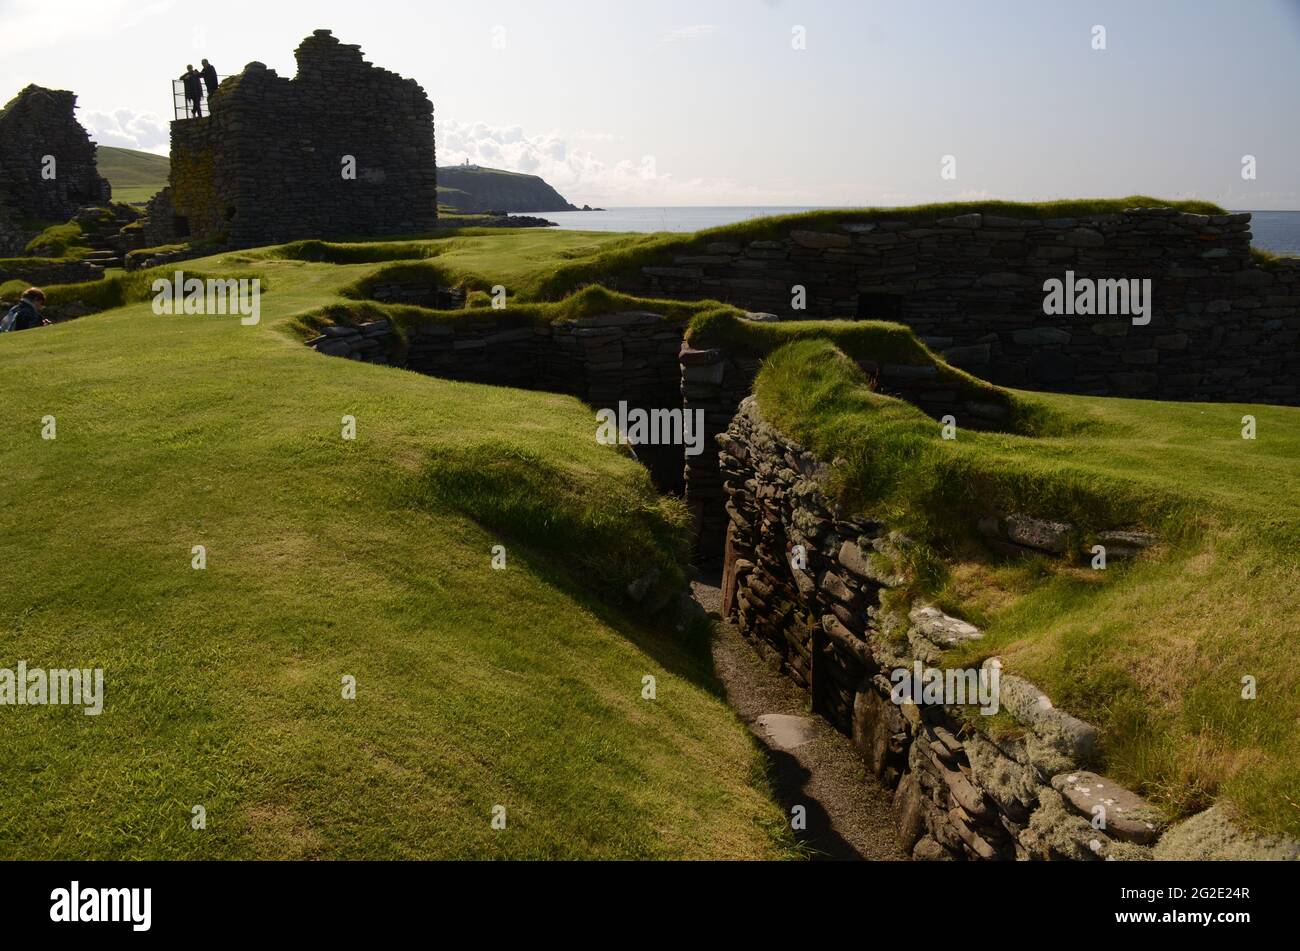 UNITED KINGDOM; SHETLAND ISLANDS, SCOTLAND; RUINS OF THE LAIRDS HOME AT THE JARLSHOF PREHISTORIC AND NORSE SETTLEMENT; WITH RUINS OF OLD UNDERGROUND Stock Photo